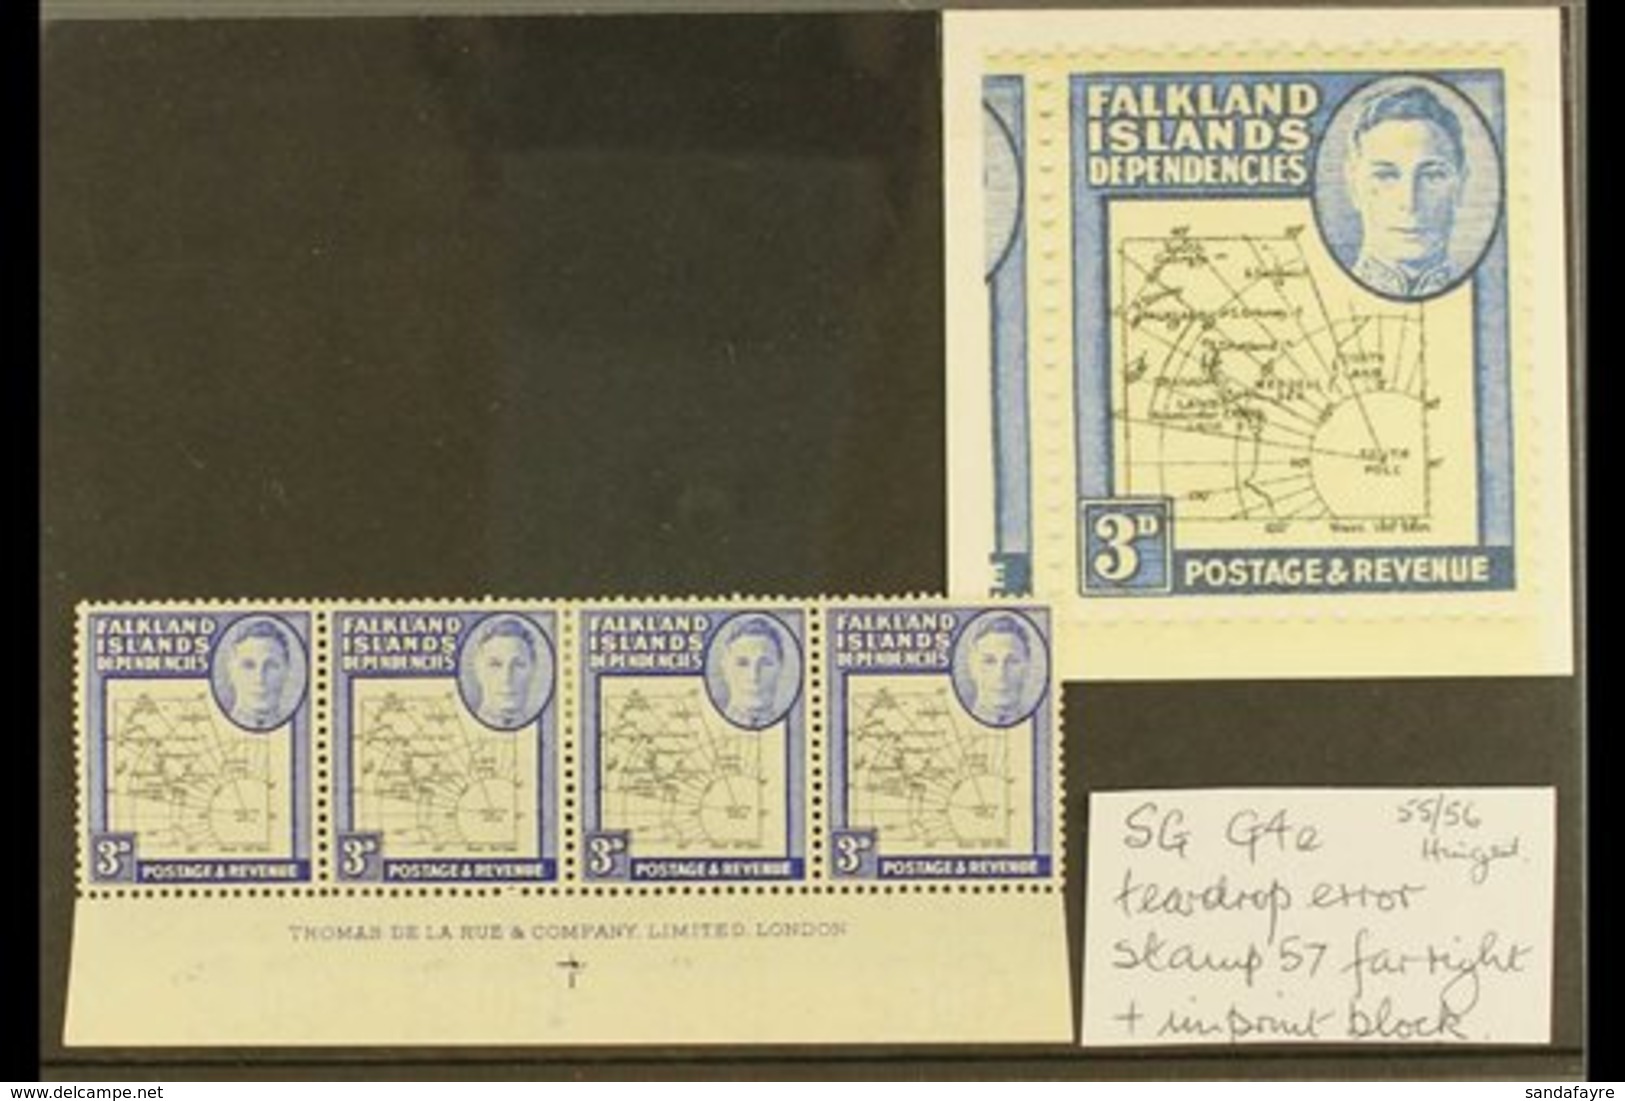 1946-49  3d Blue Thick Map IMPRINT STRIP OF FOUR, The Fourth Stamp Showing The "TEARDROP" FLAW, SG G4+G4e, Never Hinged  - Falkland Islands